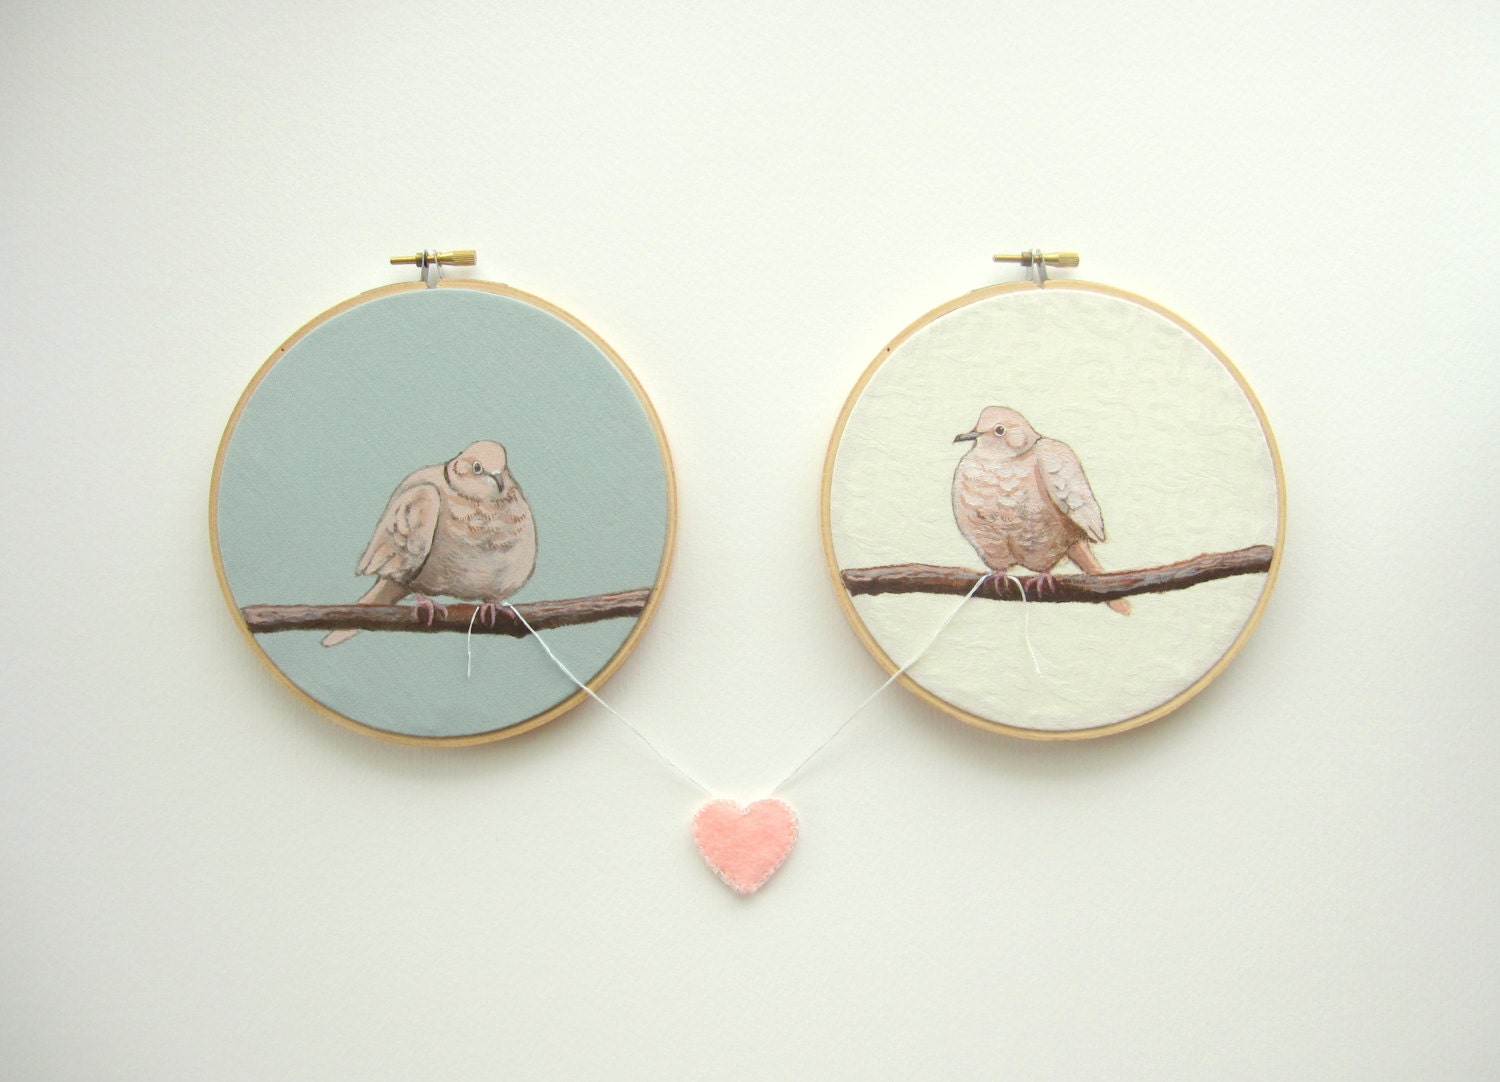 Love Doves, Hoop art, Original acrylic painting on embroidery hoops, wedding or anniversary gift - PoofyDove